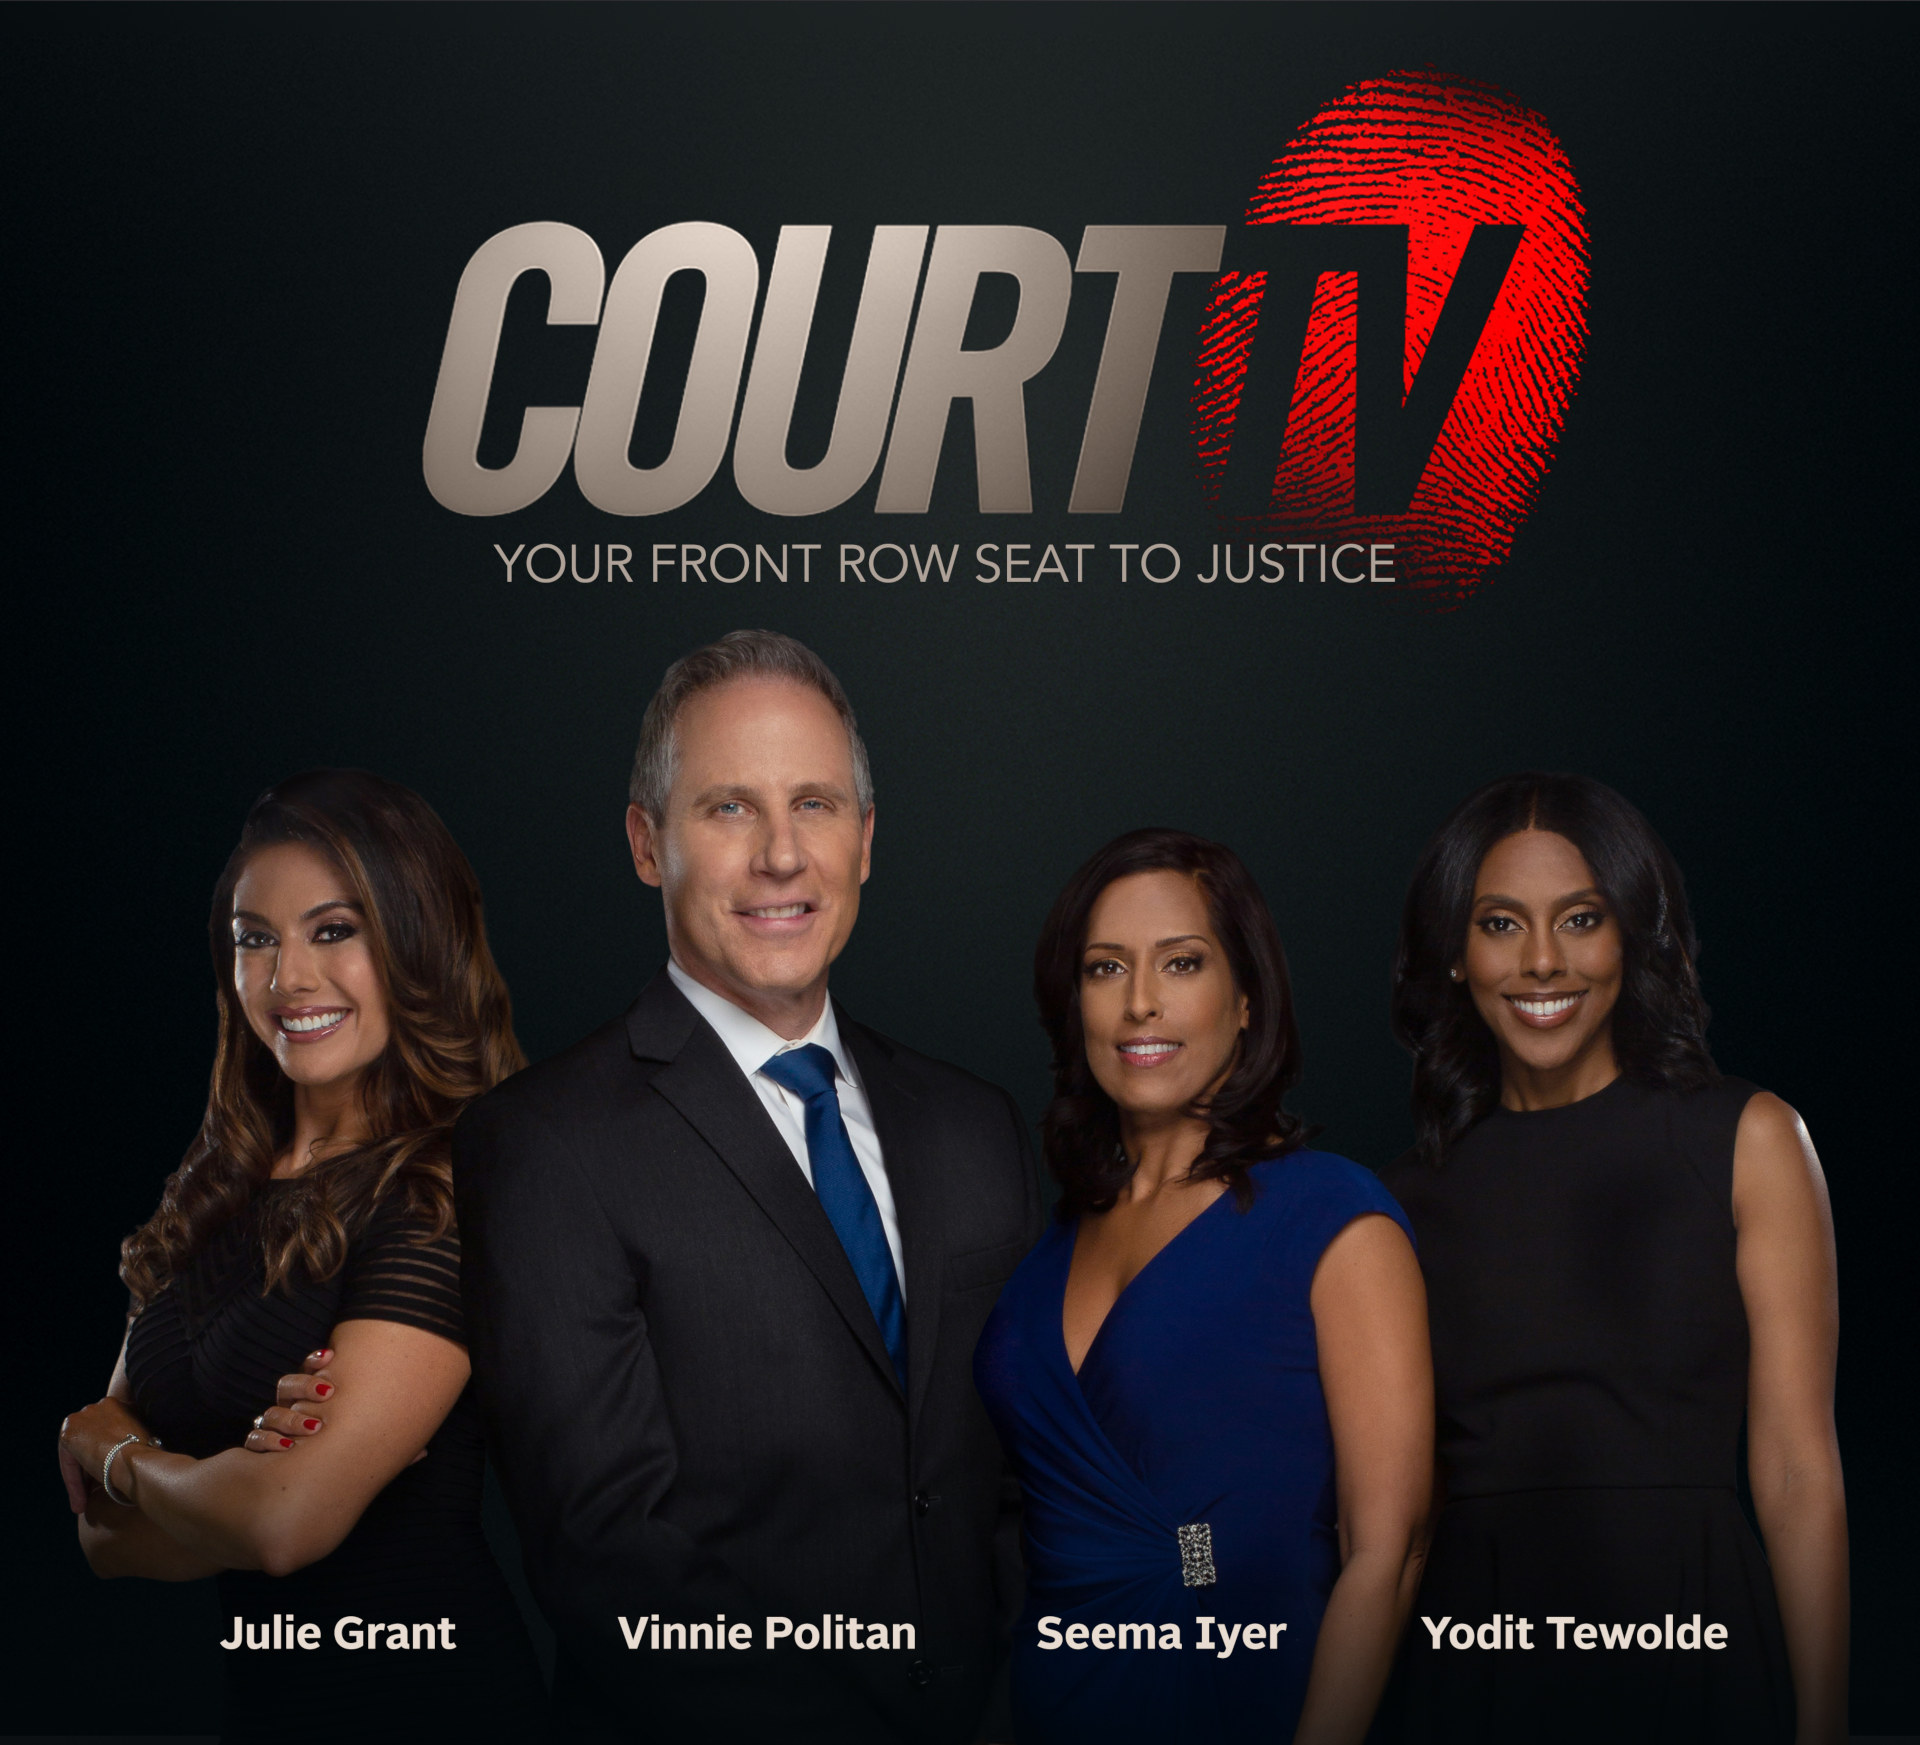 Yodit Tewolde Joins Politan, ◊ yer and Grant as New Court TV Anchor Team.